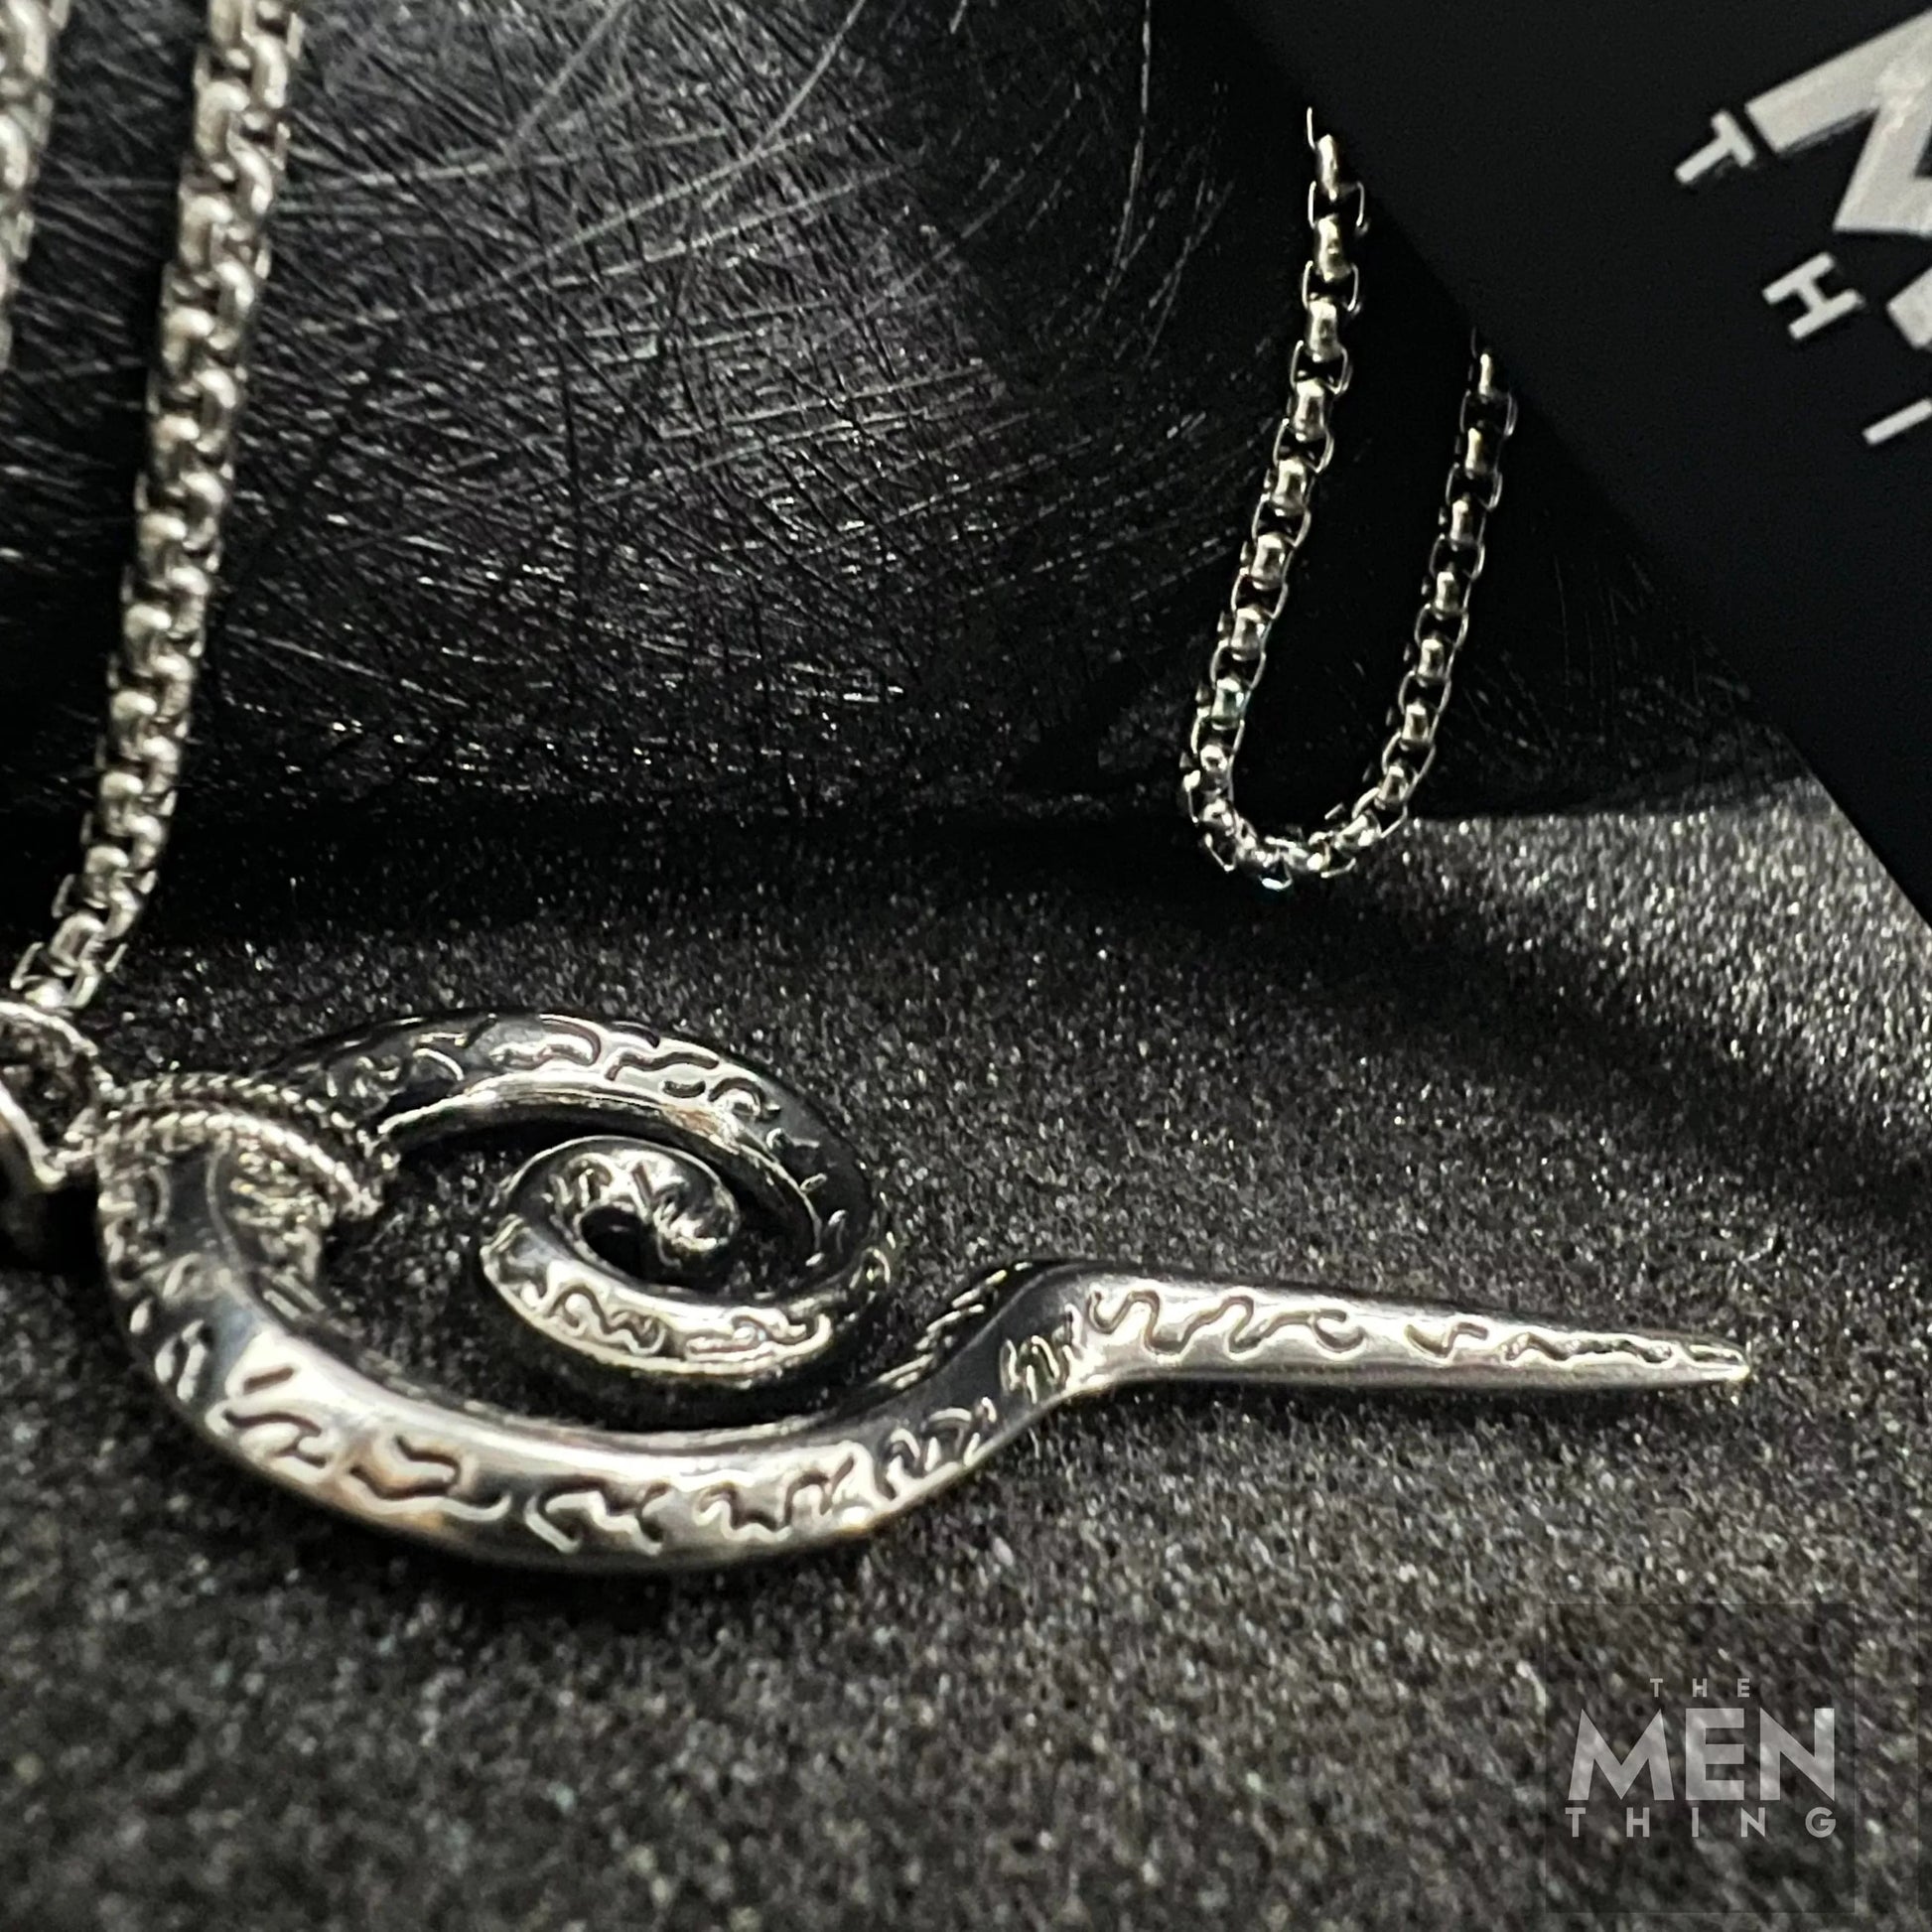 THE MEN THING Alloy Spiral Pendant with Pure Stainless Steel 24inch Chain for Men, European trending Style - Round Box Chain & Pendant for Men & Boy